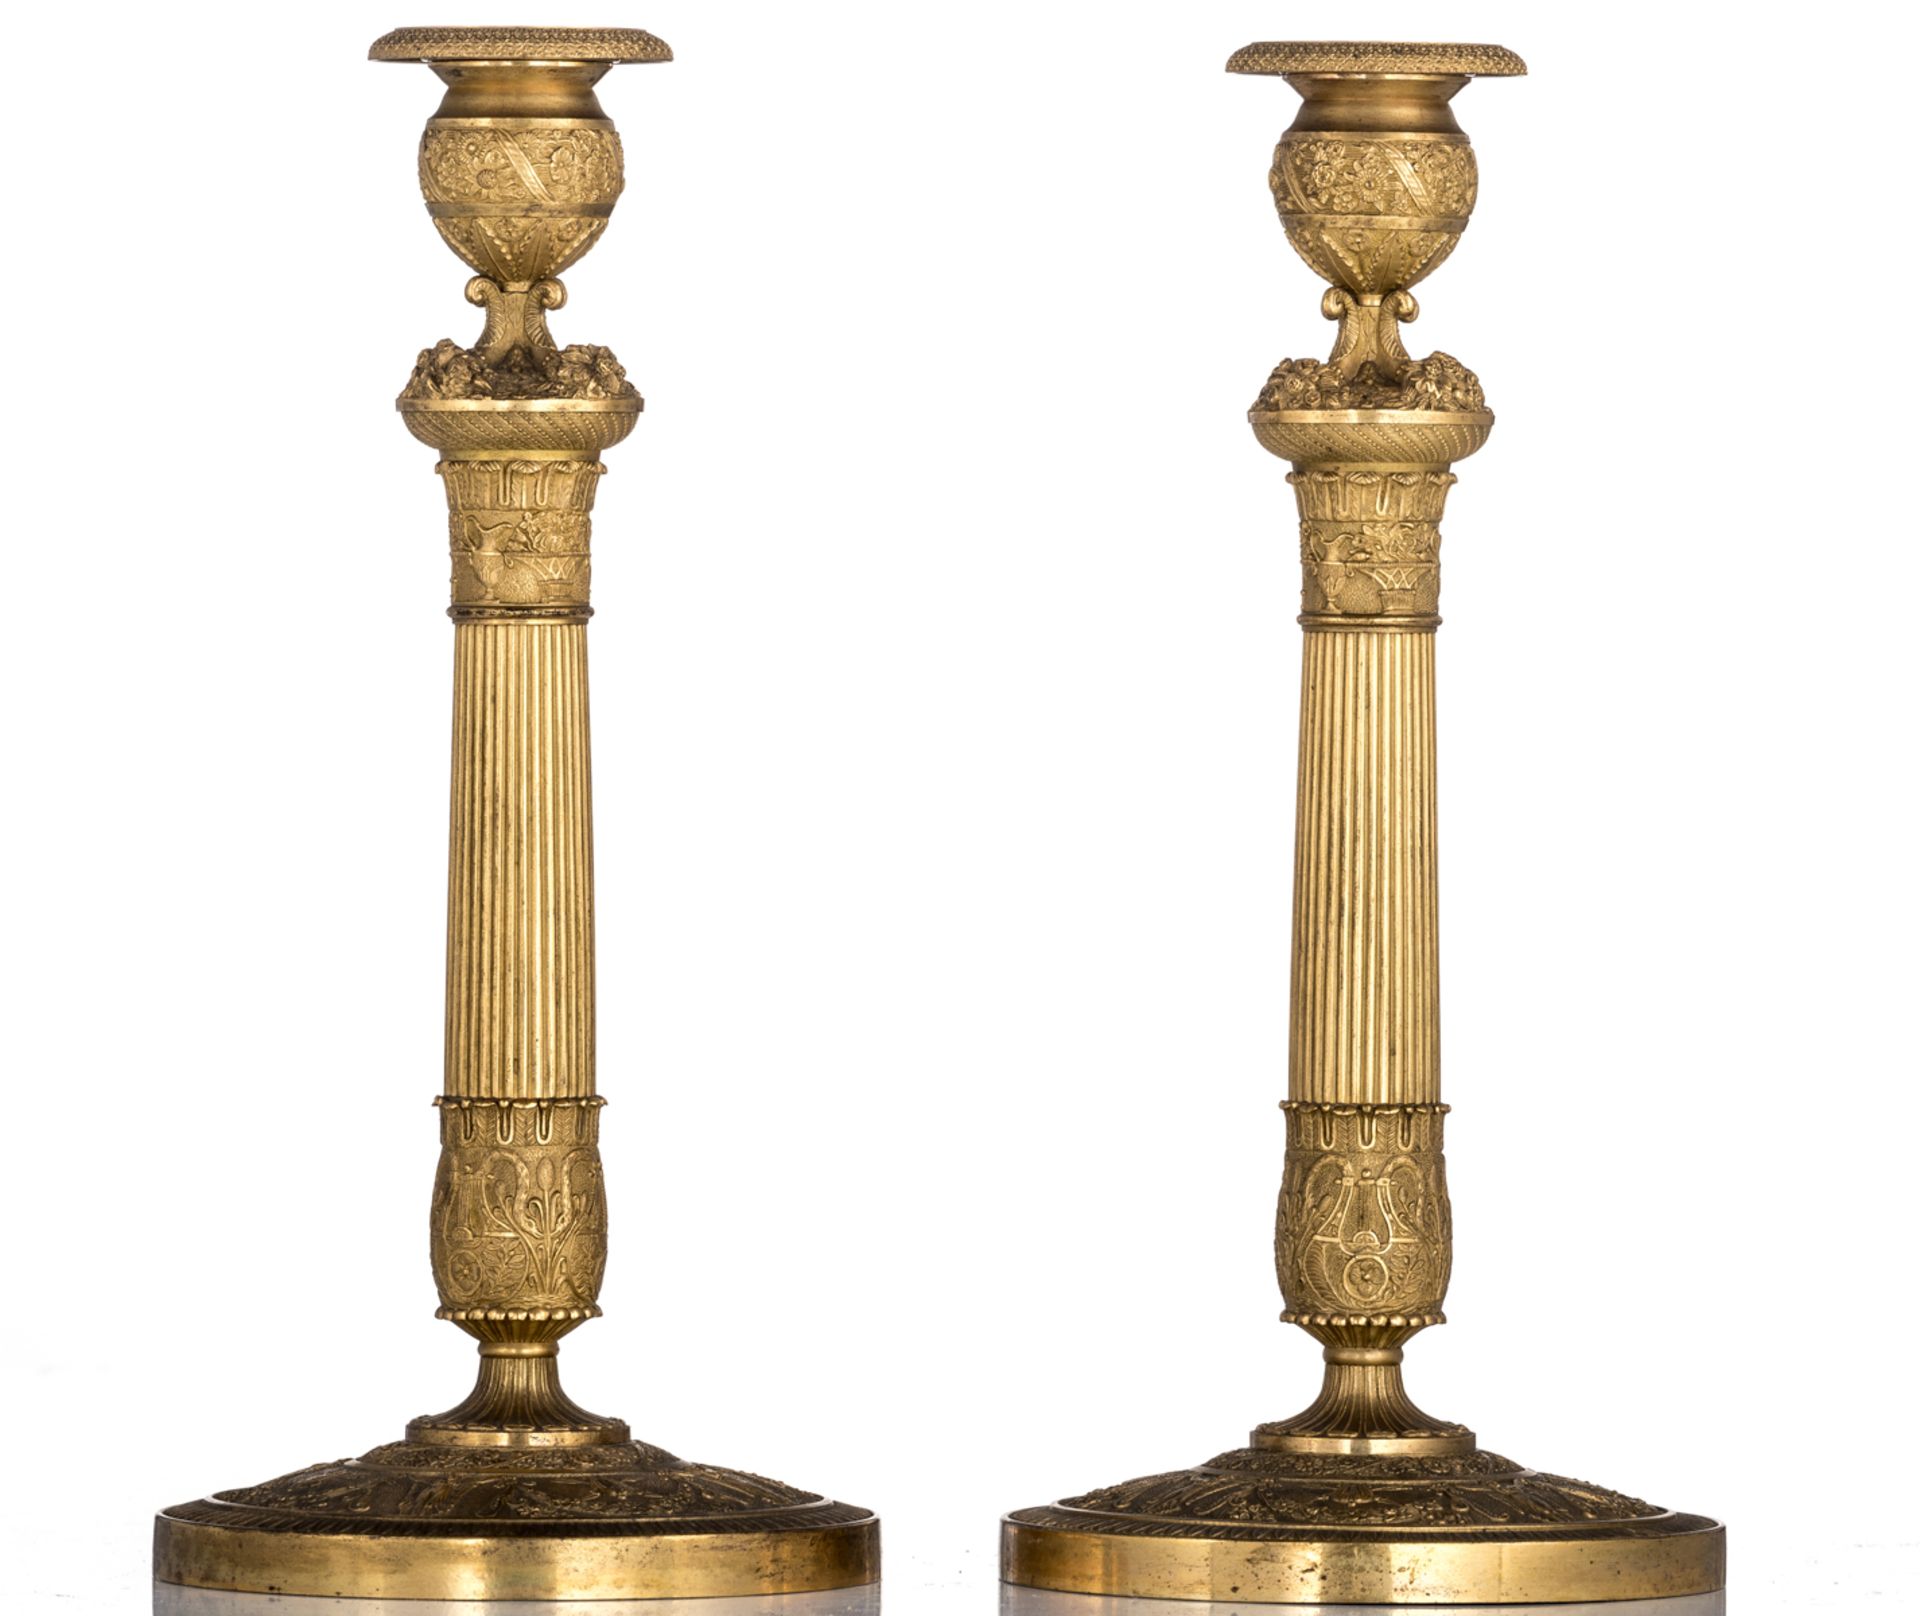 A fine pair of gilt bronze neoclassical candlesticks, first quarter of the 19thC, H 33,5 cm, ex Soth - Image 4 of 6